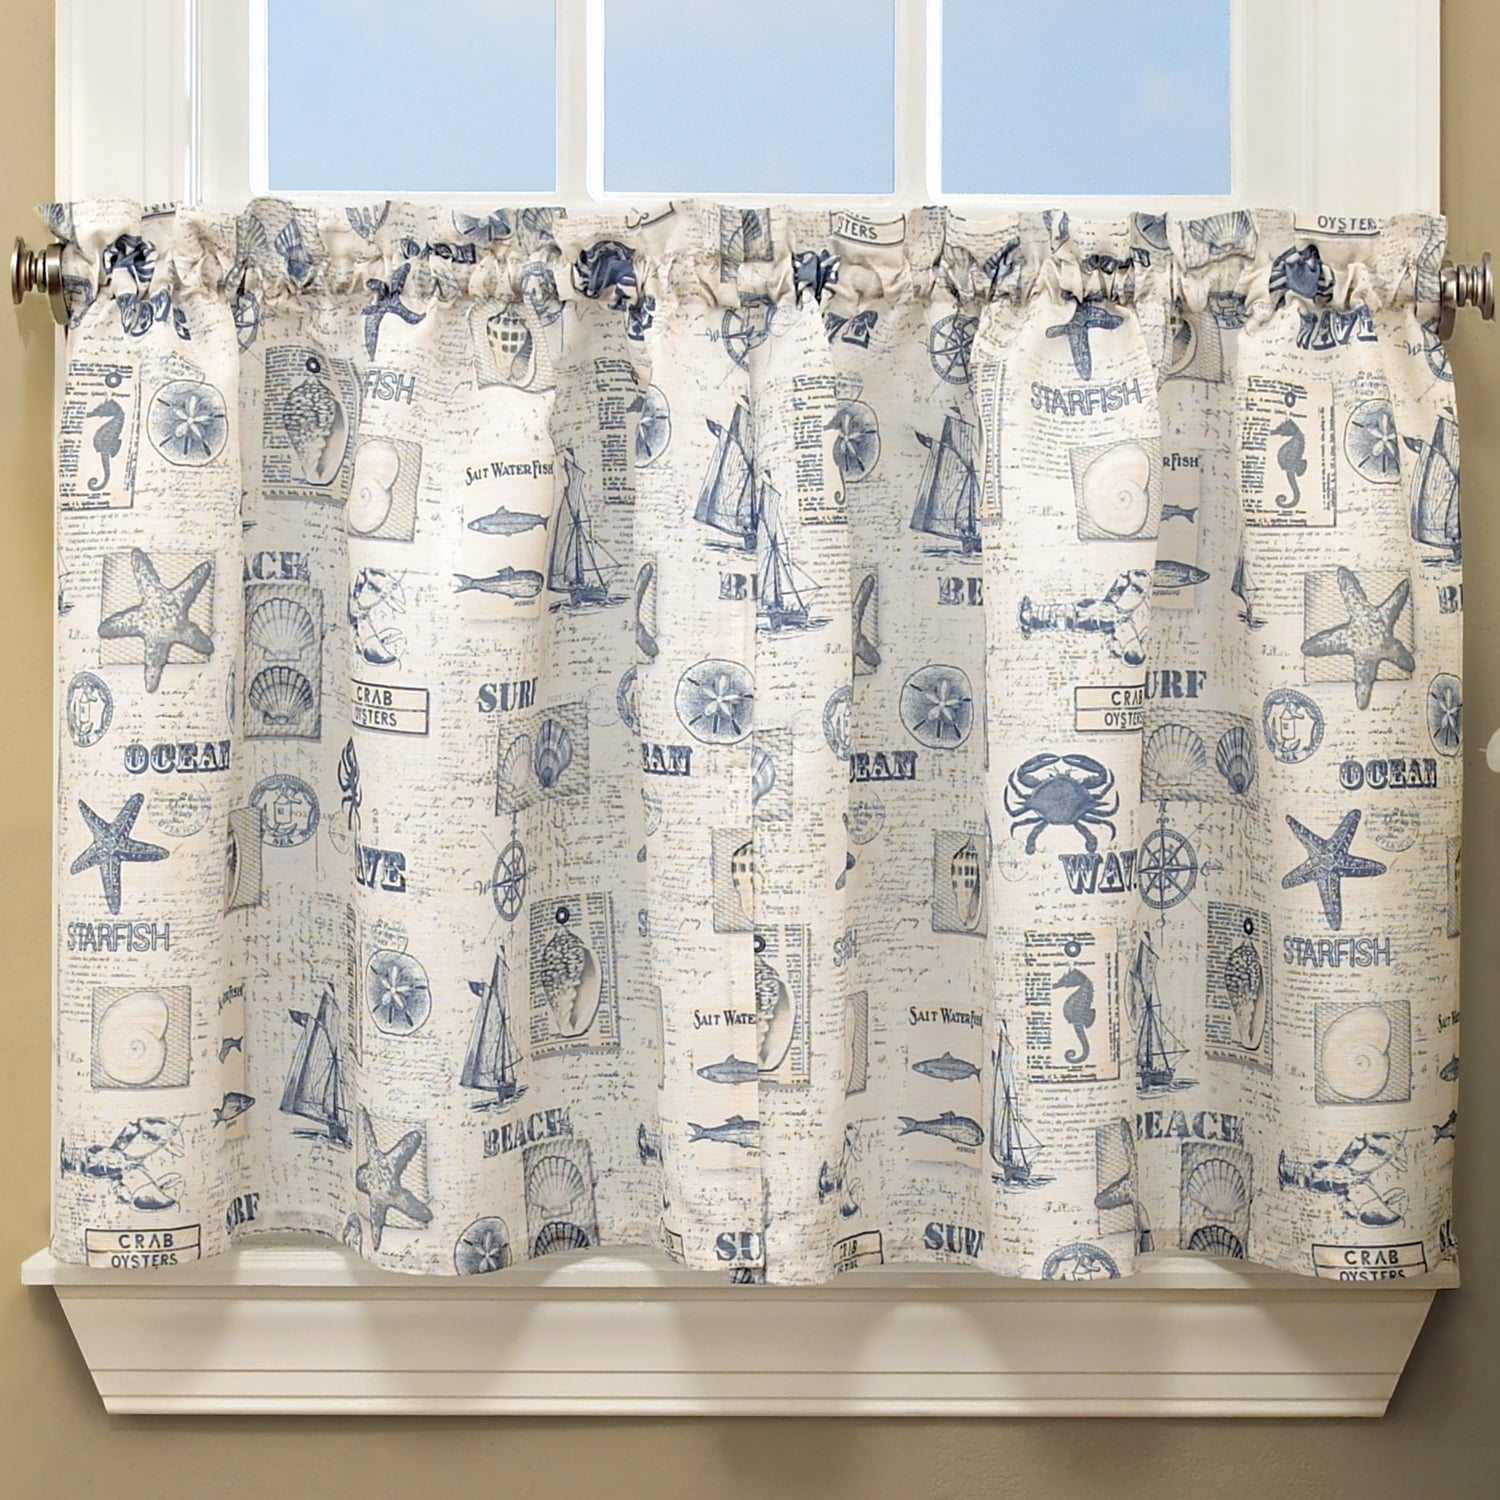 By The Sea Printed Ocean Beach Images Kitchen Curtains 24", 36" Tier